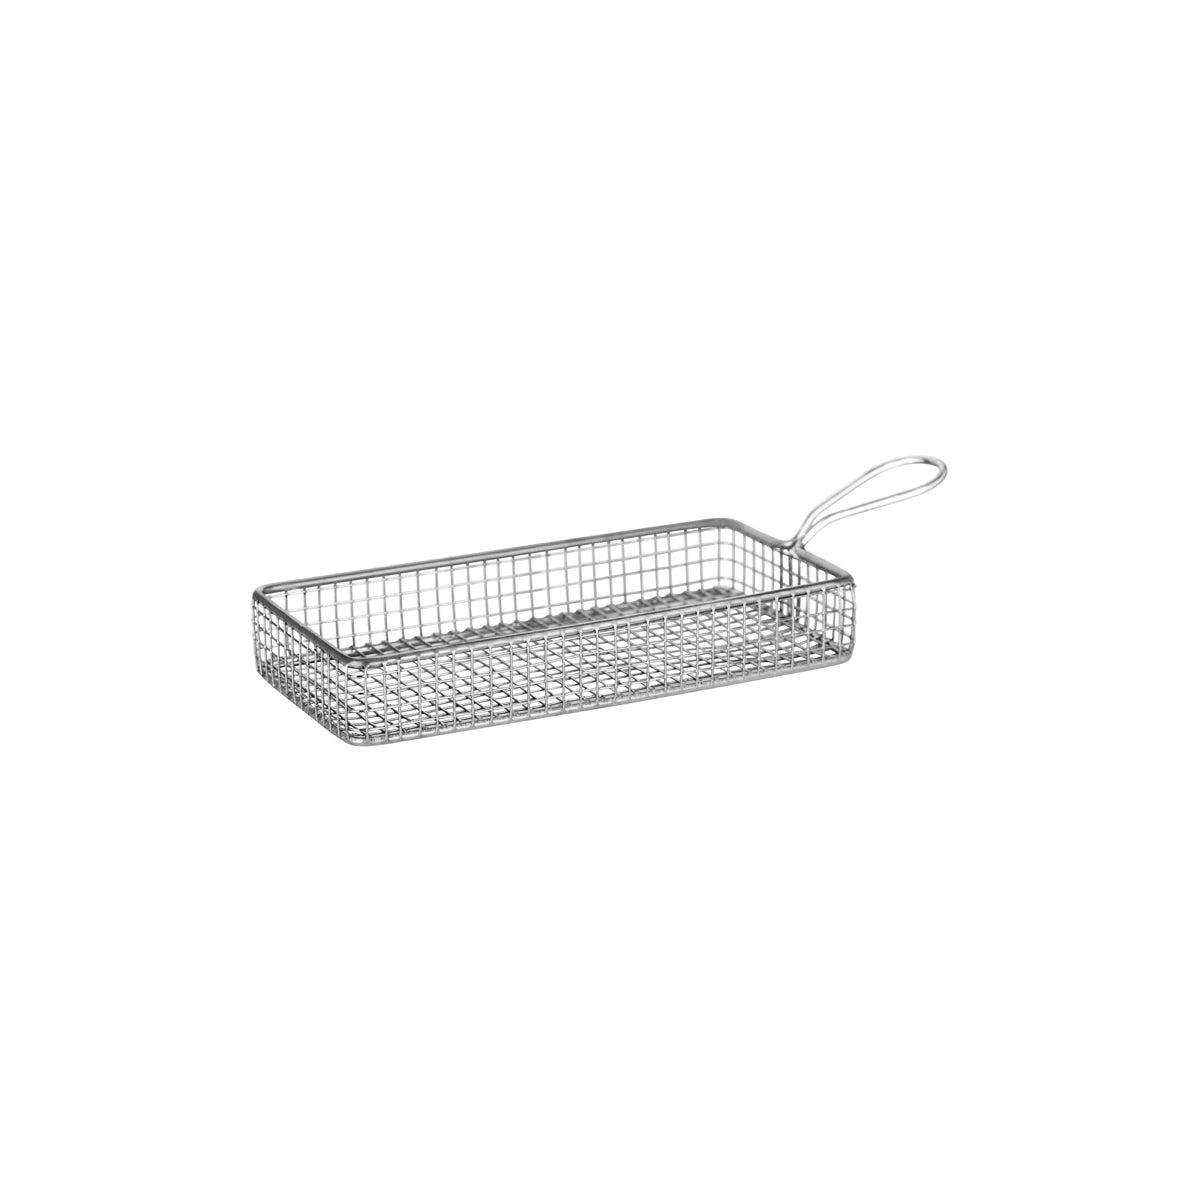 '07688 Chef Inox Wire Serving Basket Rectangular with Handle 220x100x35mm Tomkin Australia Hospitality Supplies